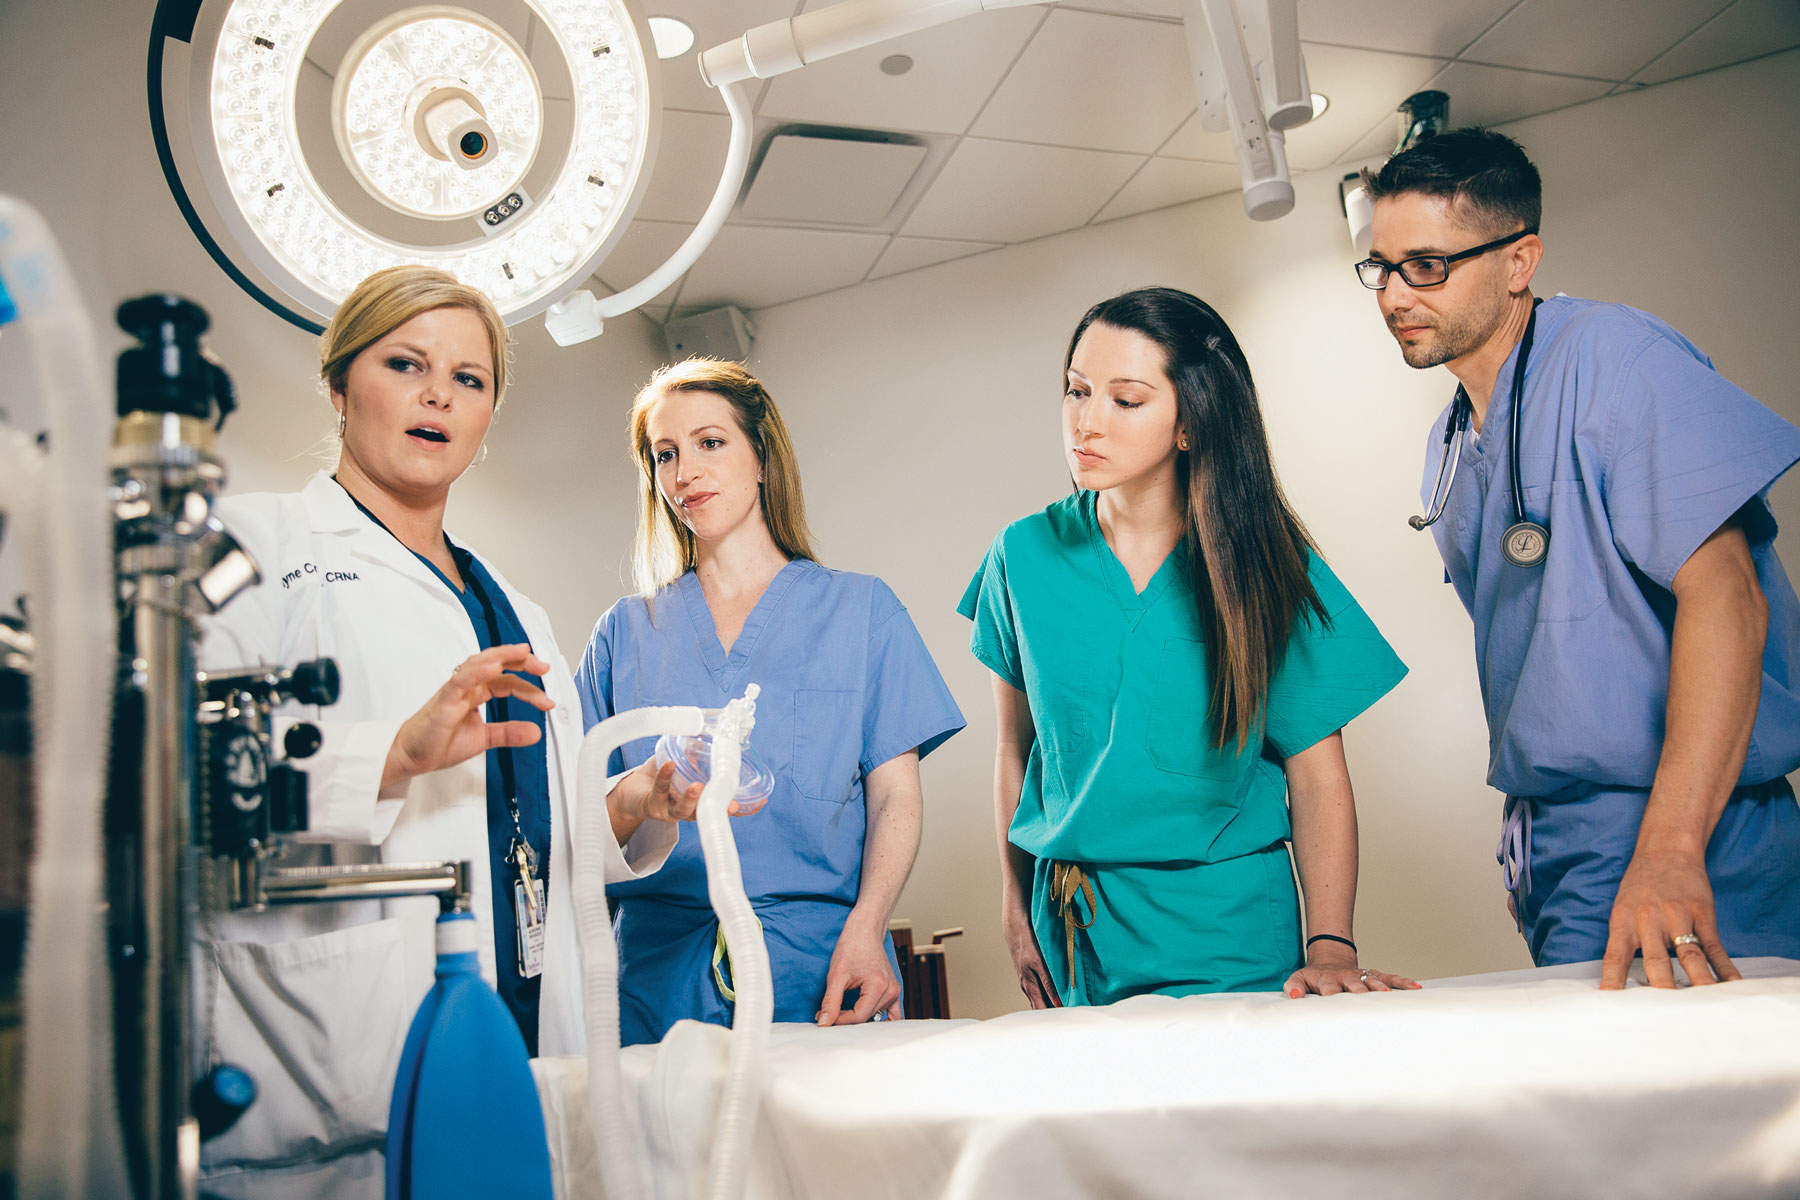 A doctorate in nursing degree can help CRNAs stay competitive